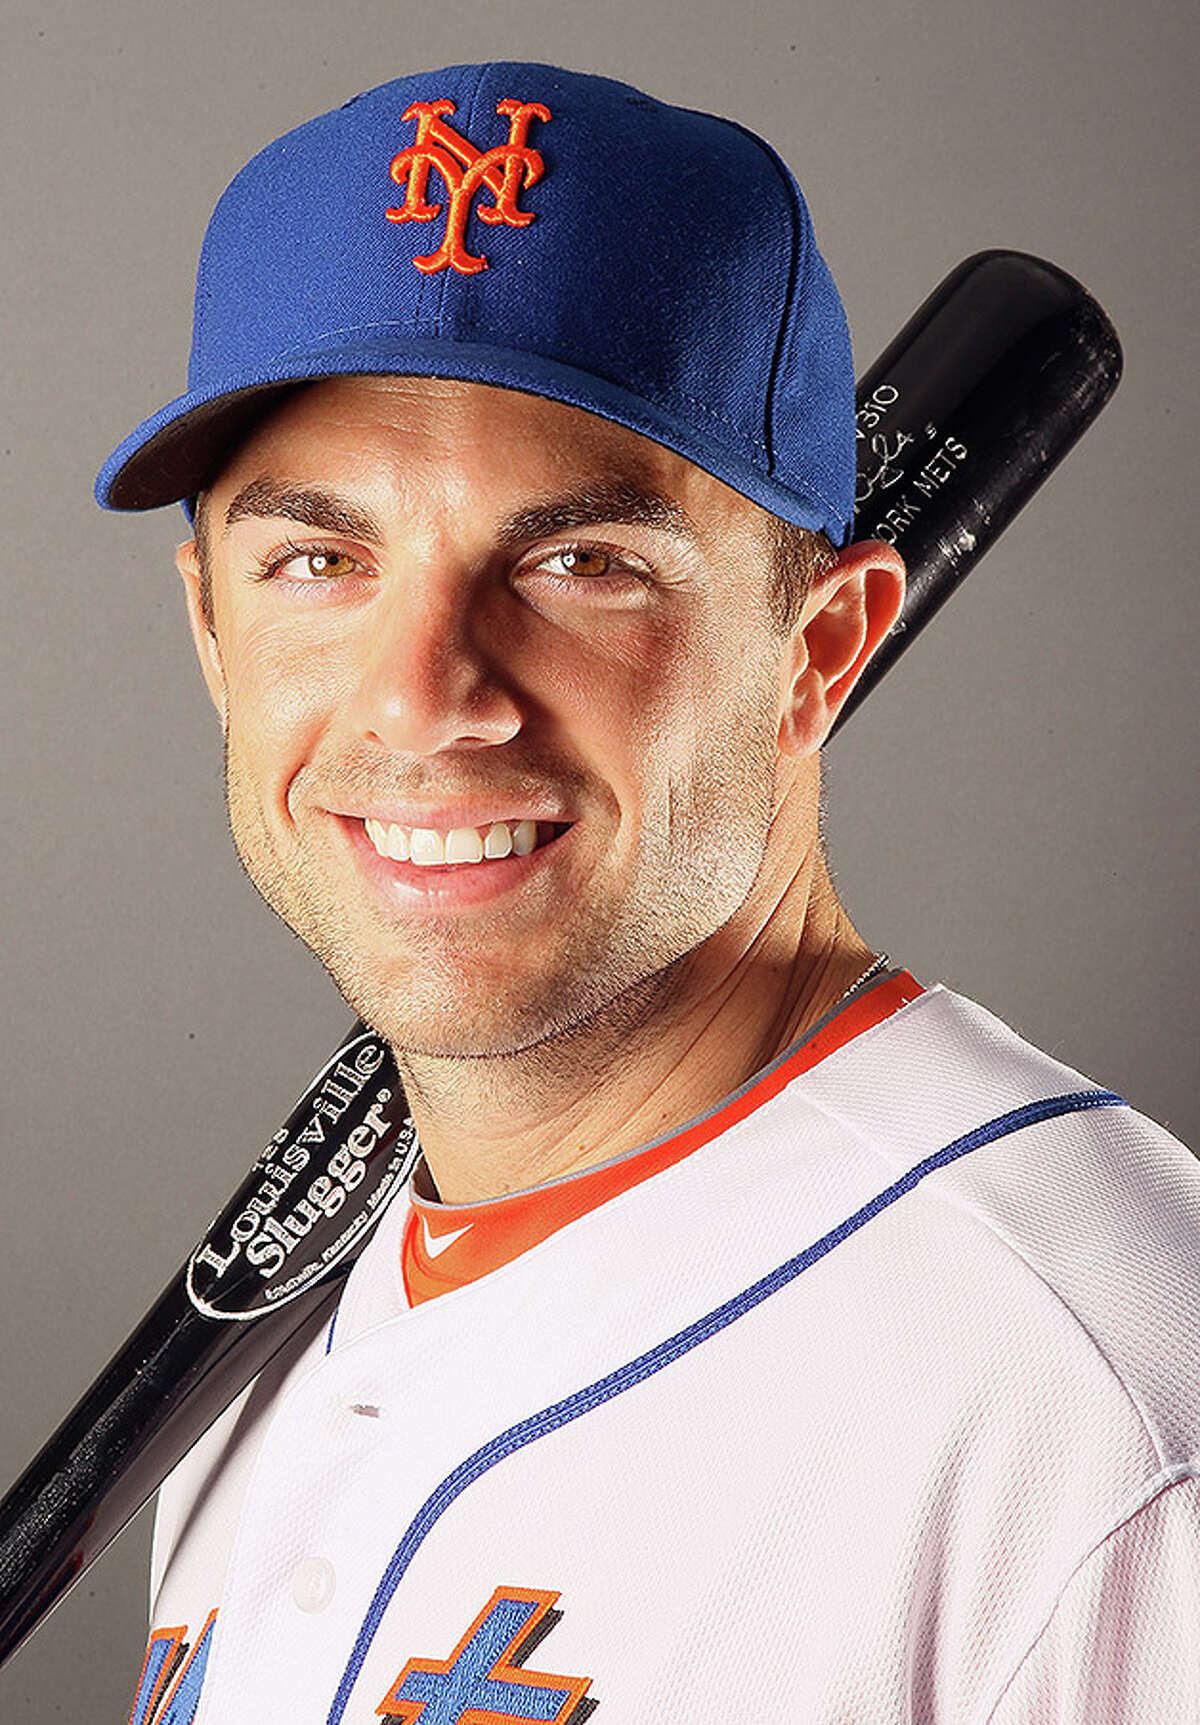 PORT ST. LUCIE, FL - FEBRUARY 24: David Wright # 5 of the New York Mets poses for a portrait during the New York Mets Photo Day on February 24, 2011 at Digital Domain Park in Port St. Lucie, Florida. (Photo by Elsa/Getty Images) *** Local Caption *** David Wright